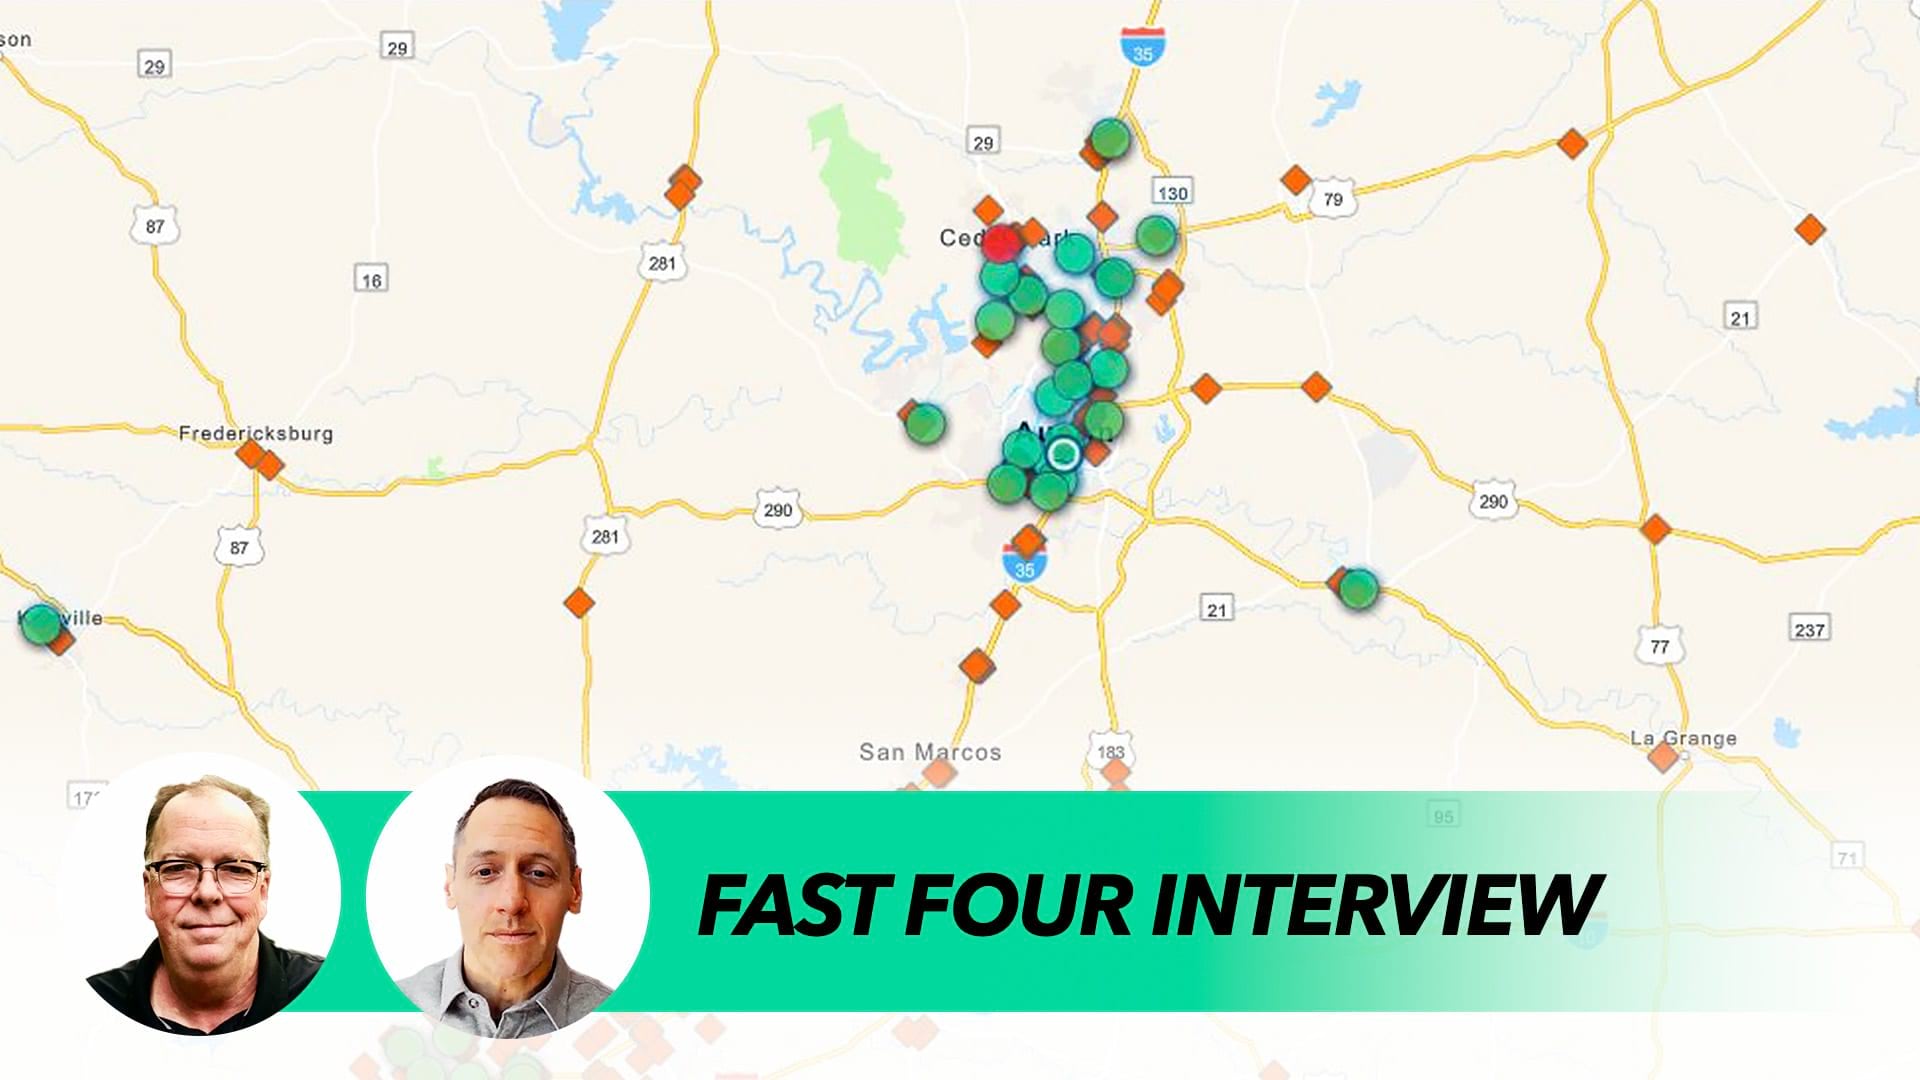 Interview participants Gary Sankary and Chris Chiappinelli on a map of San Marcos Texas